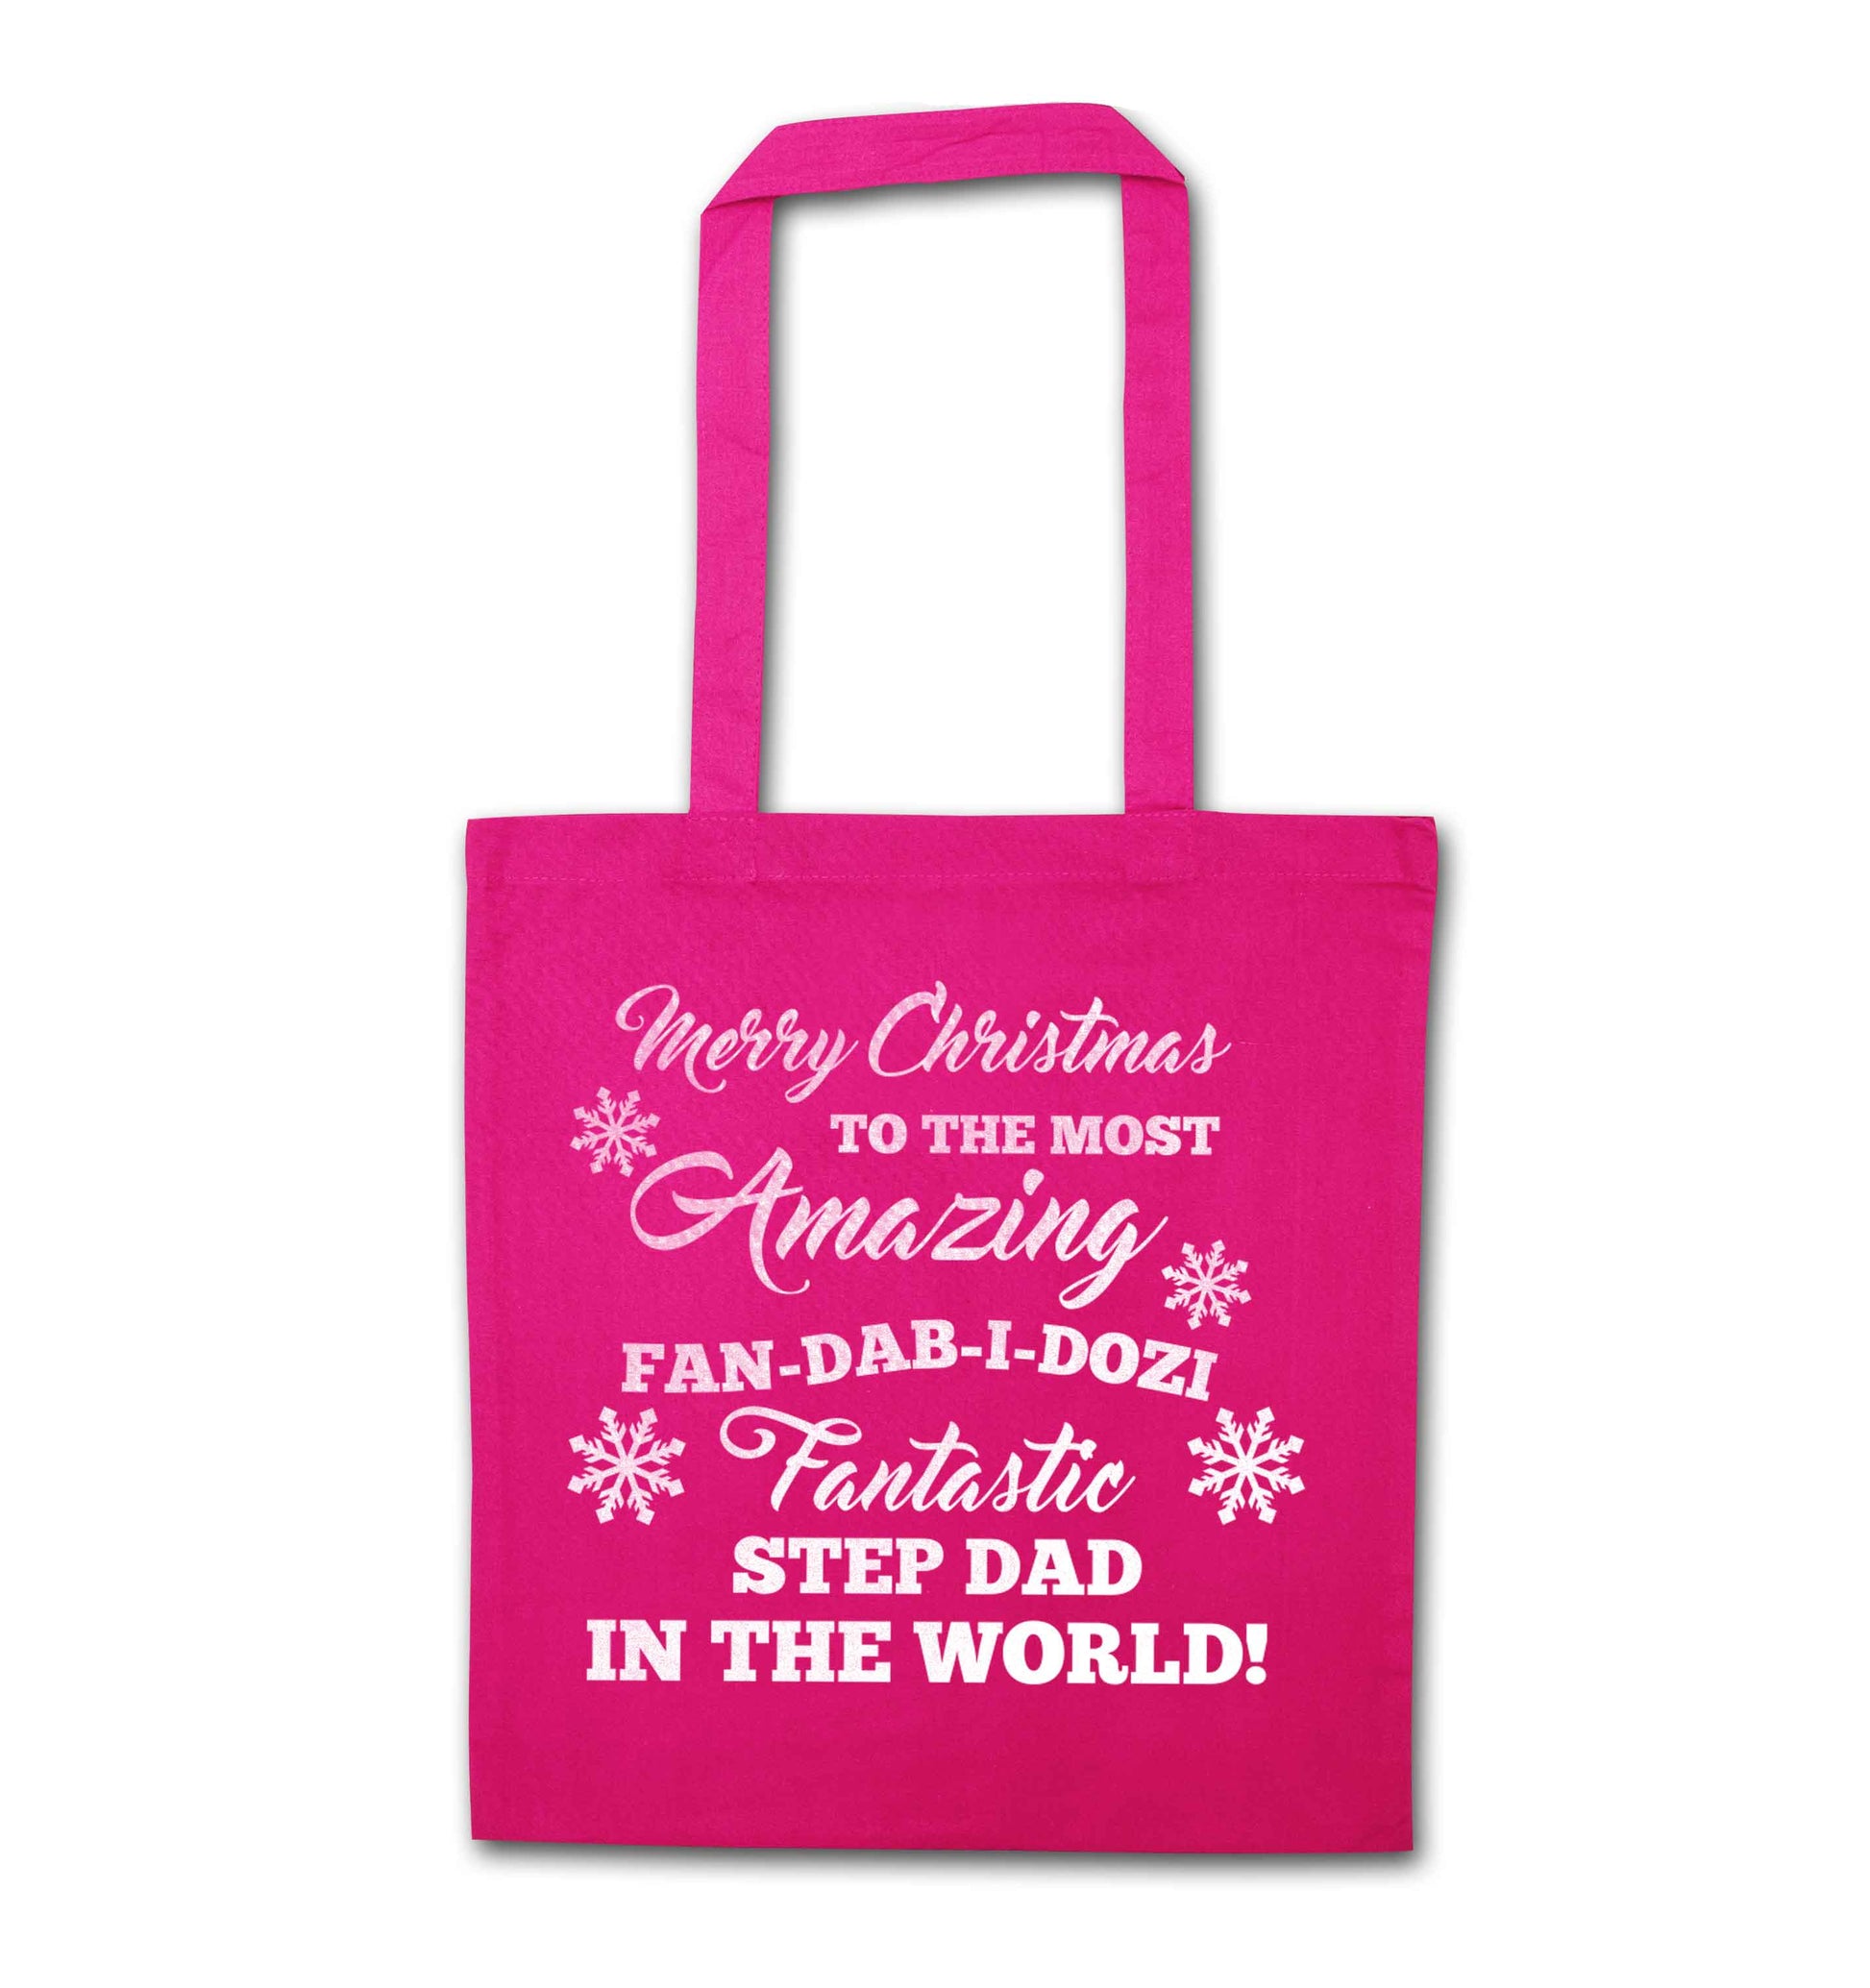 Merry Christmas to the most amazing fan-dab-i-dozi fantasic Step Dad in the world pink tote bag